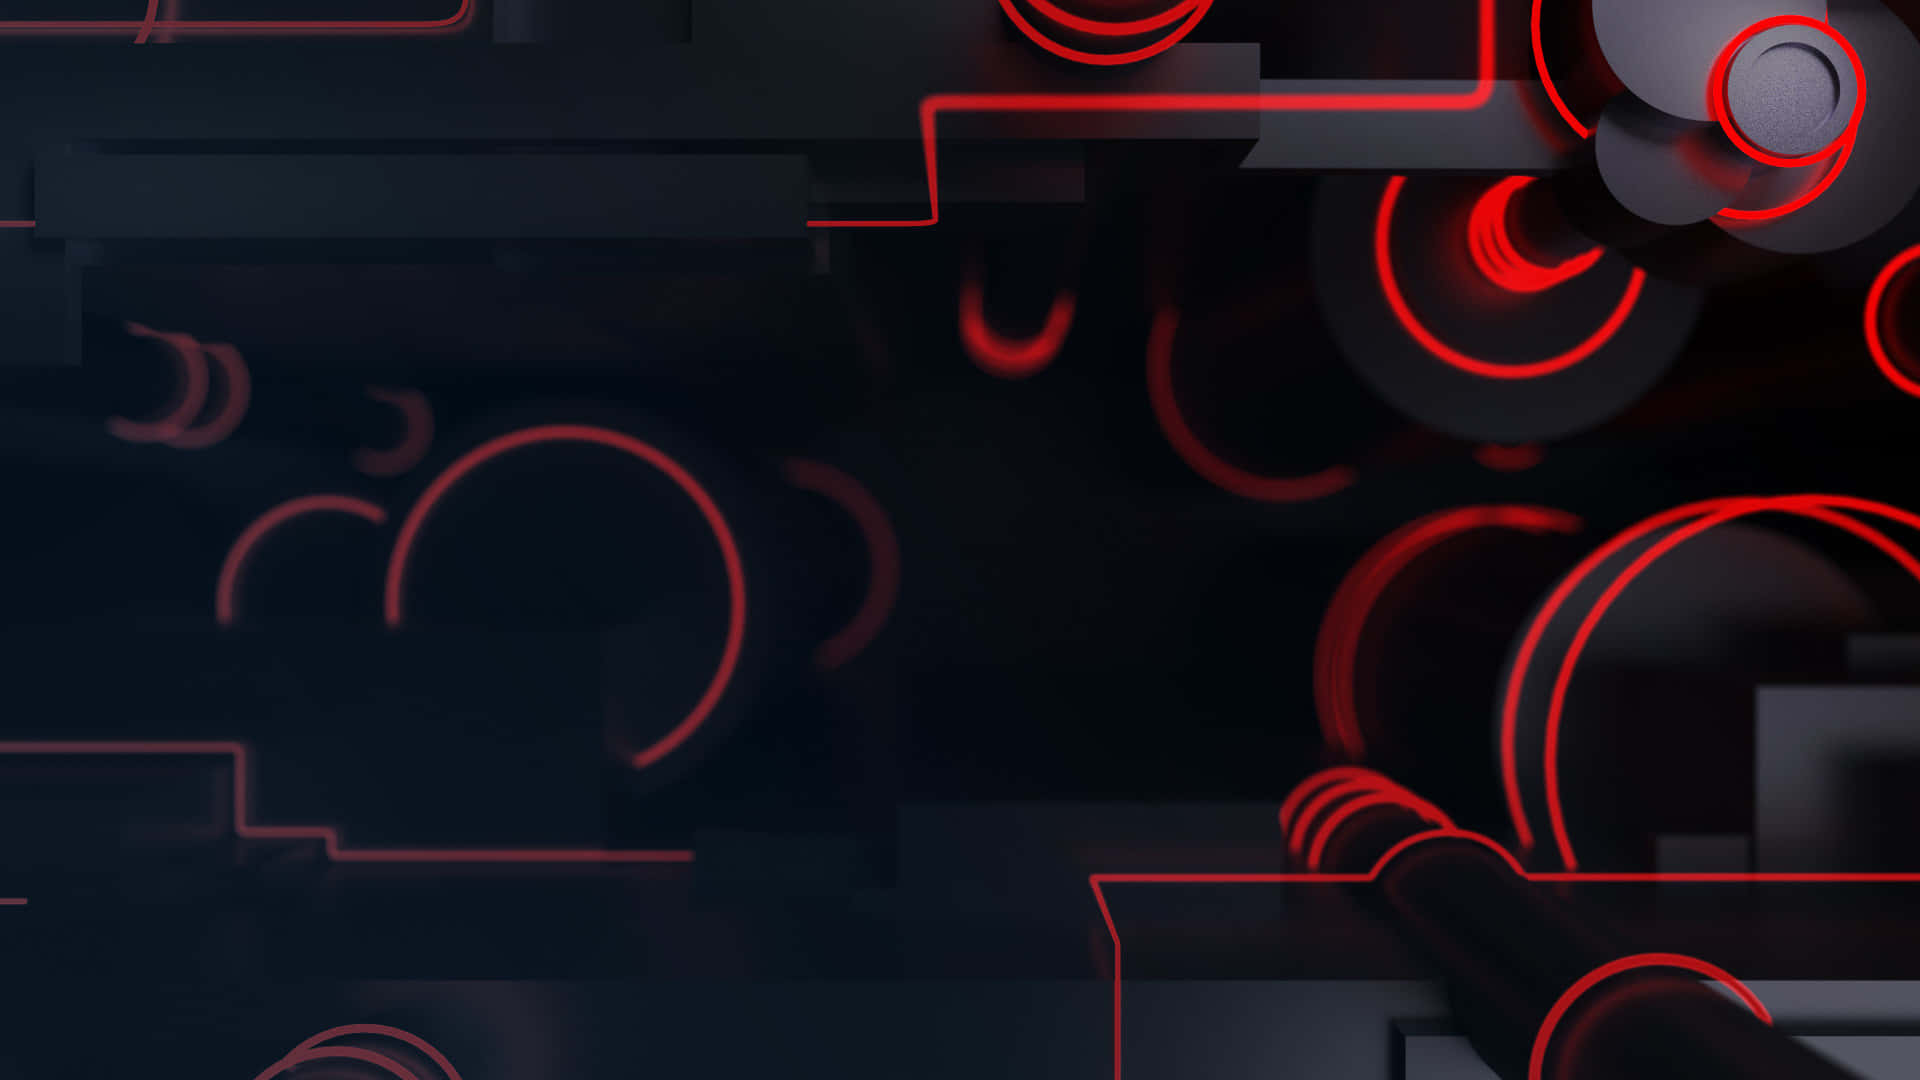 A Red And Black Background With Circles And Circles